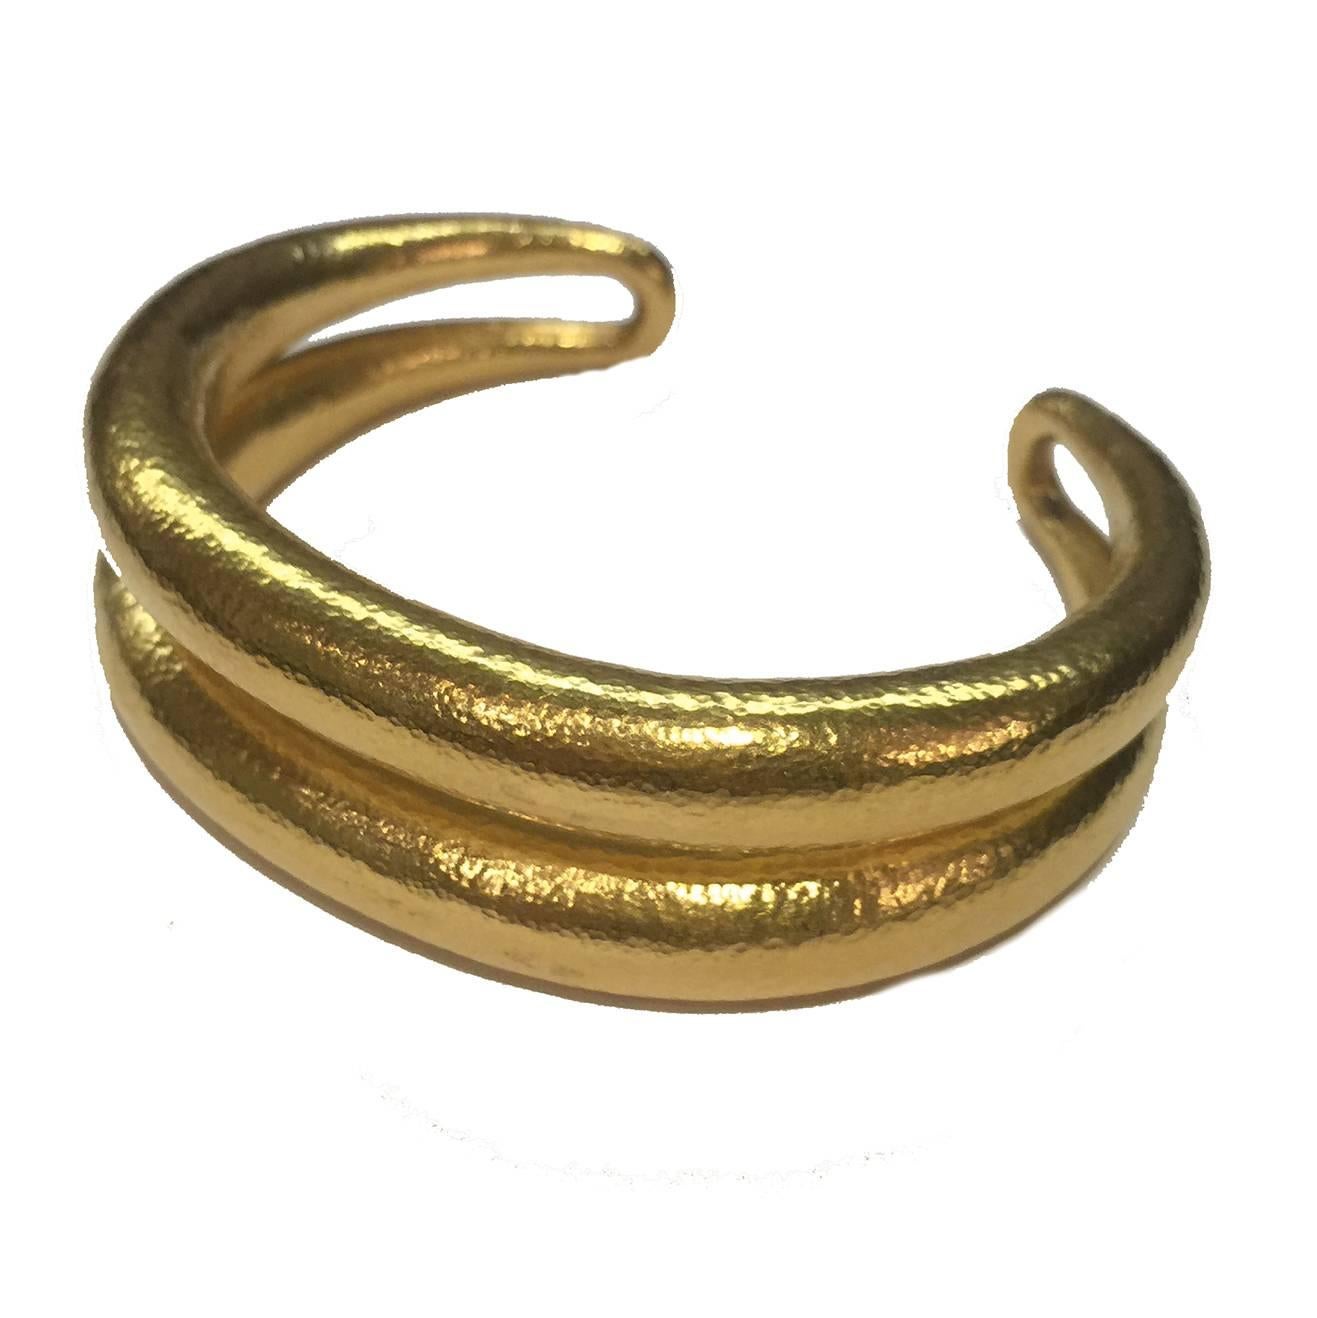 A yellow gold hammered Zolotas bracelet 
Inside diameter : 60 mm
Opening width : 30 mm
Bracelet witdth in the middle part : 21 mm
Net weight : 52 grams